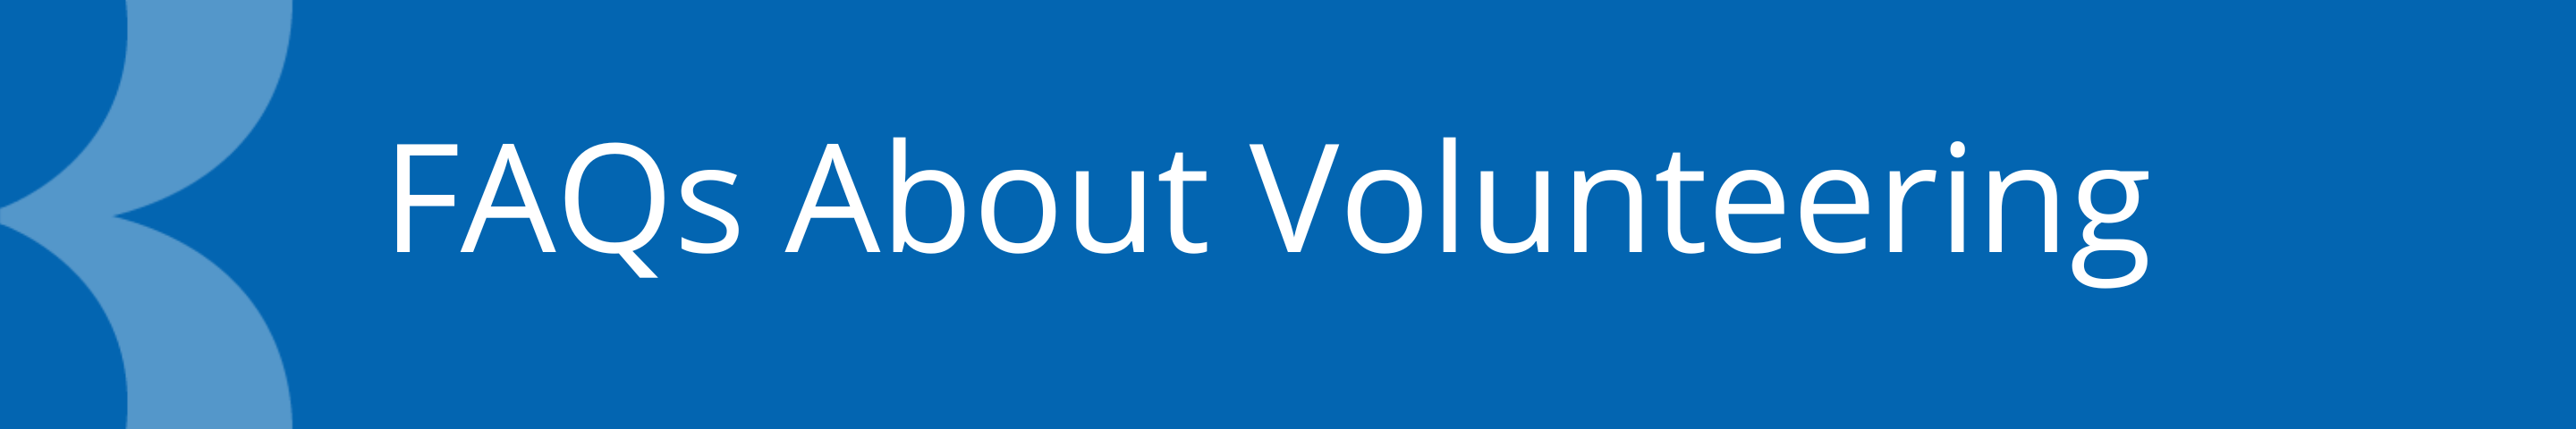 Blue banner with text that reads FAQs About Volunteering